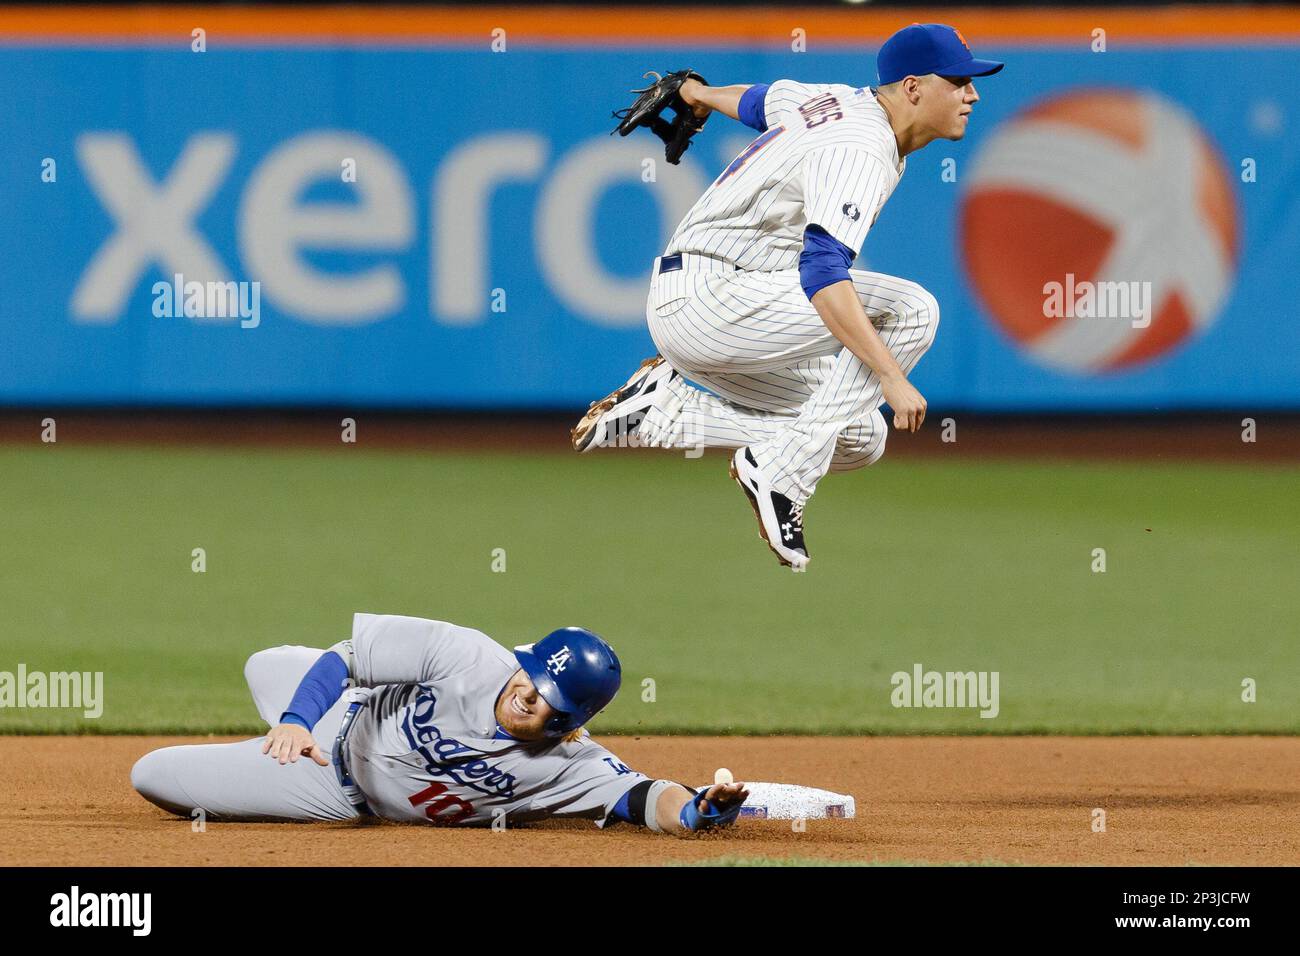 May 22, 2014: New York Mets Infield Wilmer Flores (4) [5870] leaps